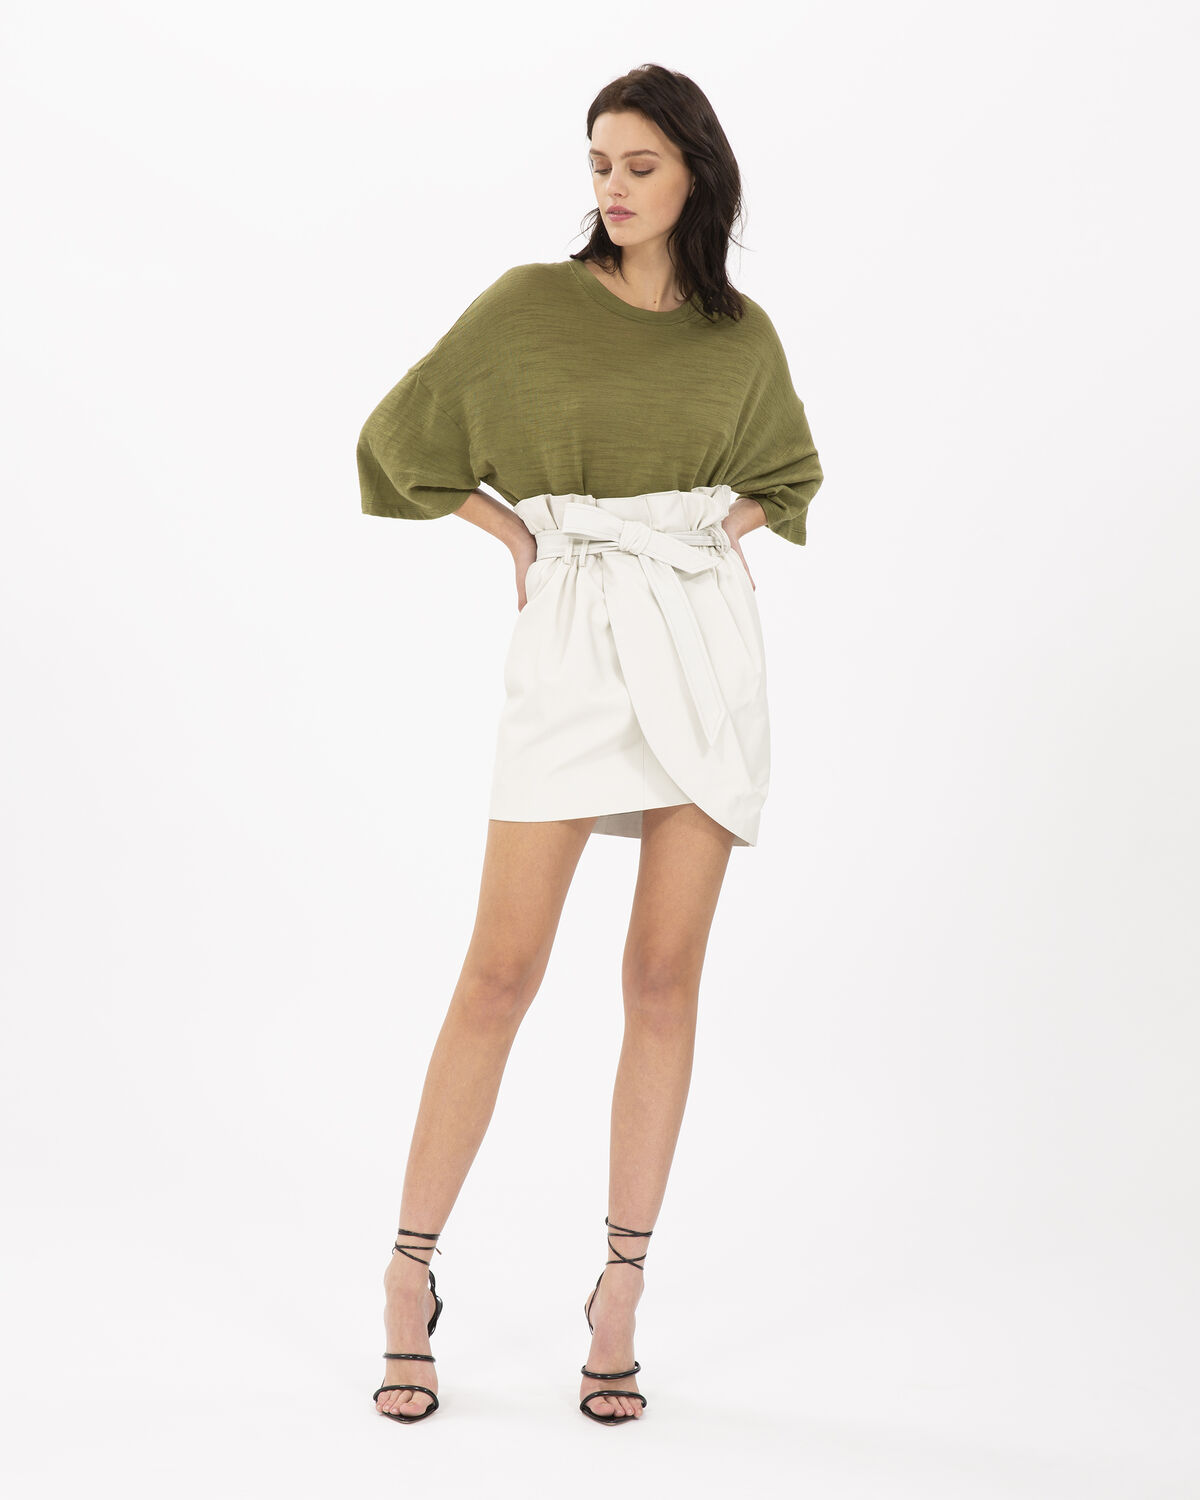 Photo of IRO Paris Silva Skirt Ecru - This Leather Wallet Skirt Features An Integrated Belt To Mark Your Waist And Its Pleating Work. During The Day For A Working Girl Look Or At Night For A Chic Rock Look, It Will Adapt To All Your Outfits. Skirts-Shorts